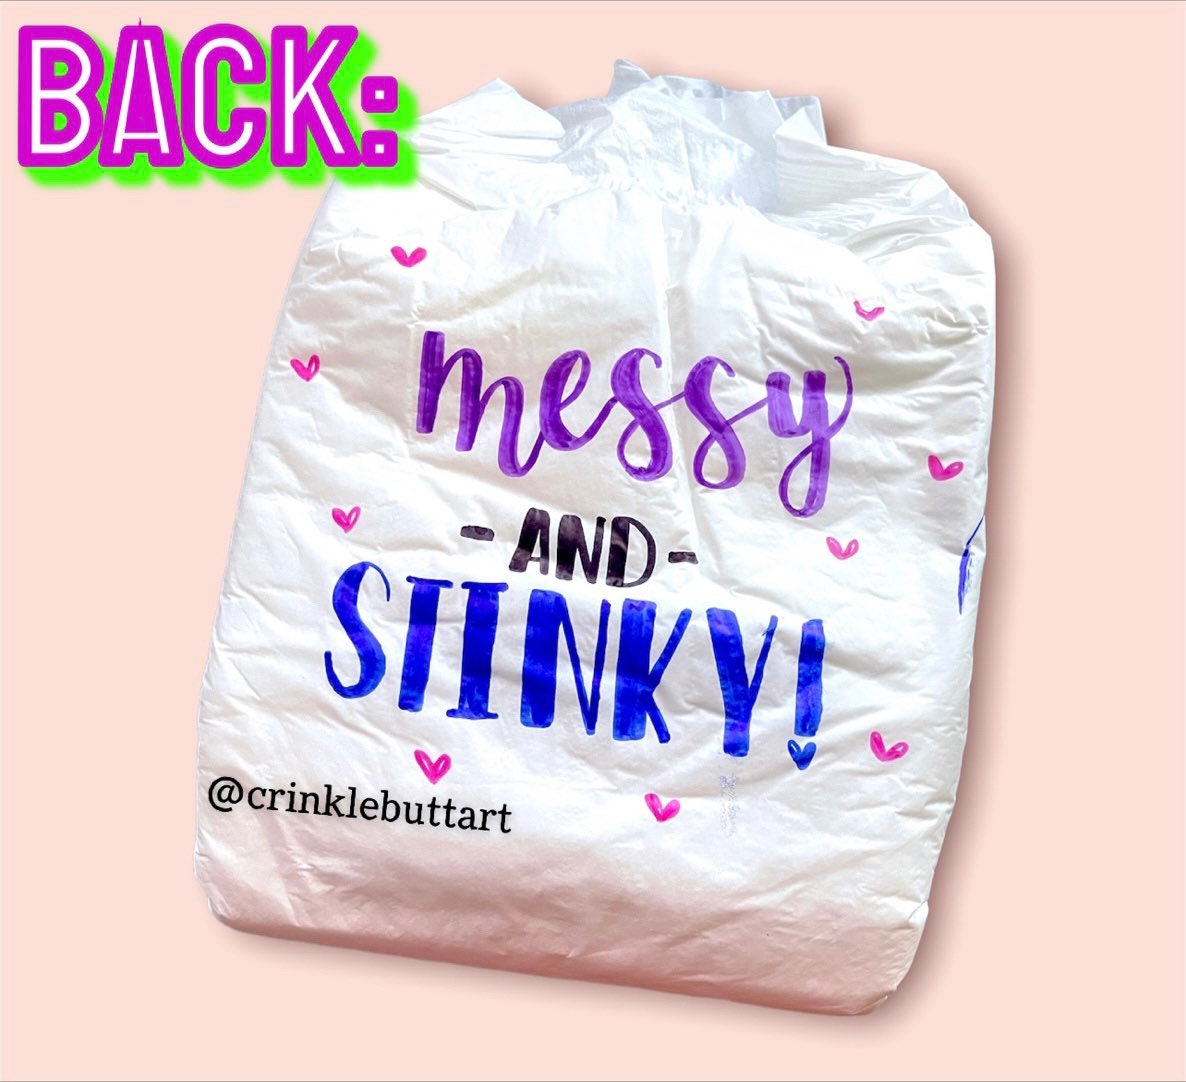 ABDL Adult Baby Diaper, “Wet and Squishy & Messy and Stinky " Front and Rear Lettering